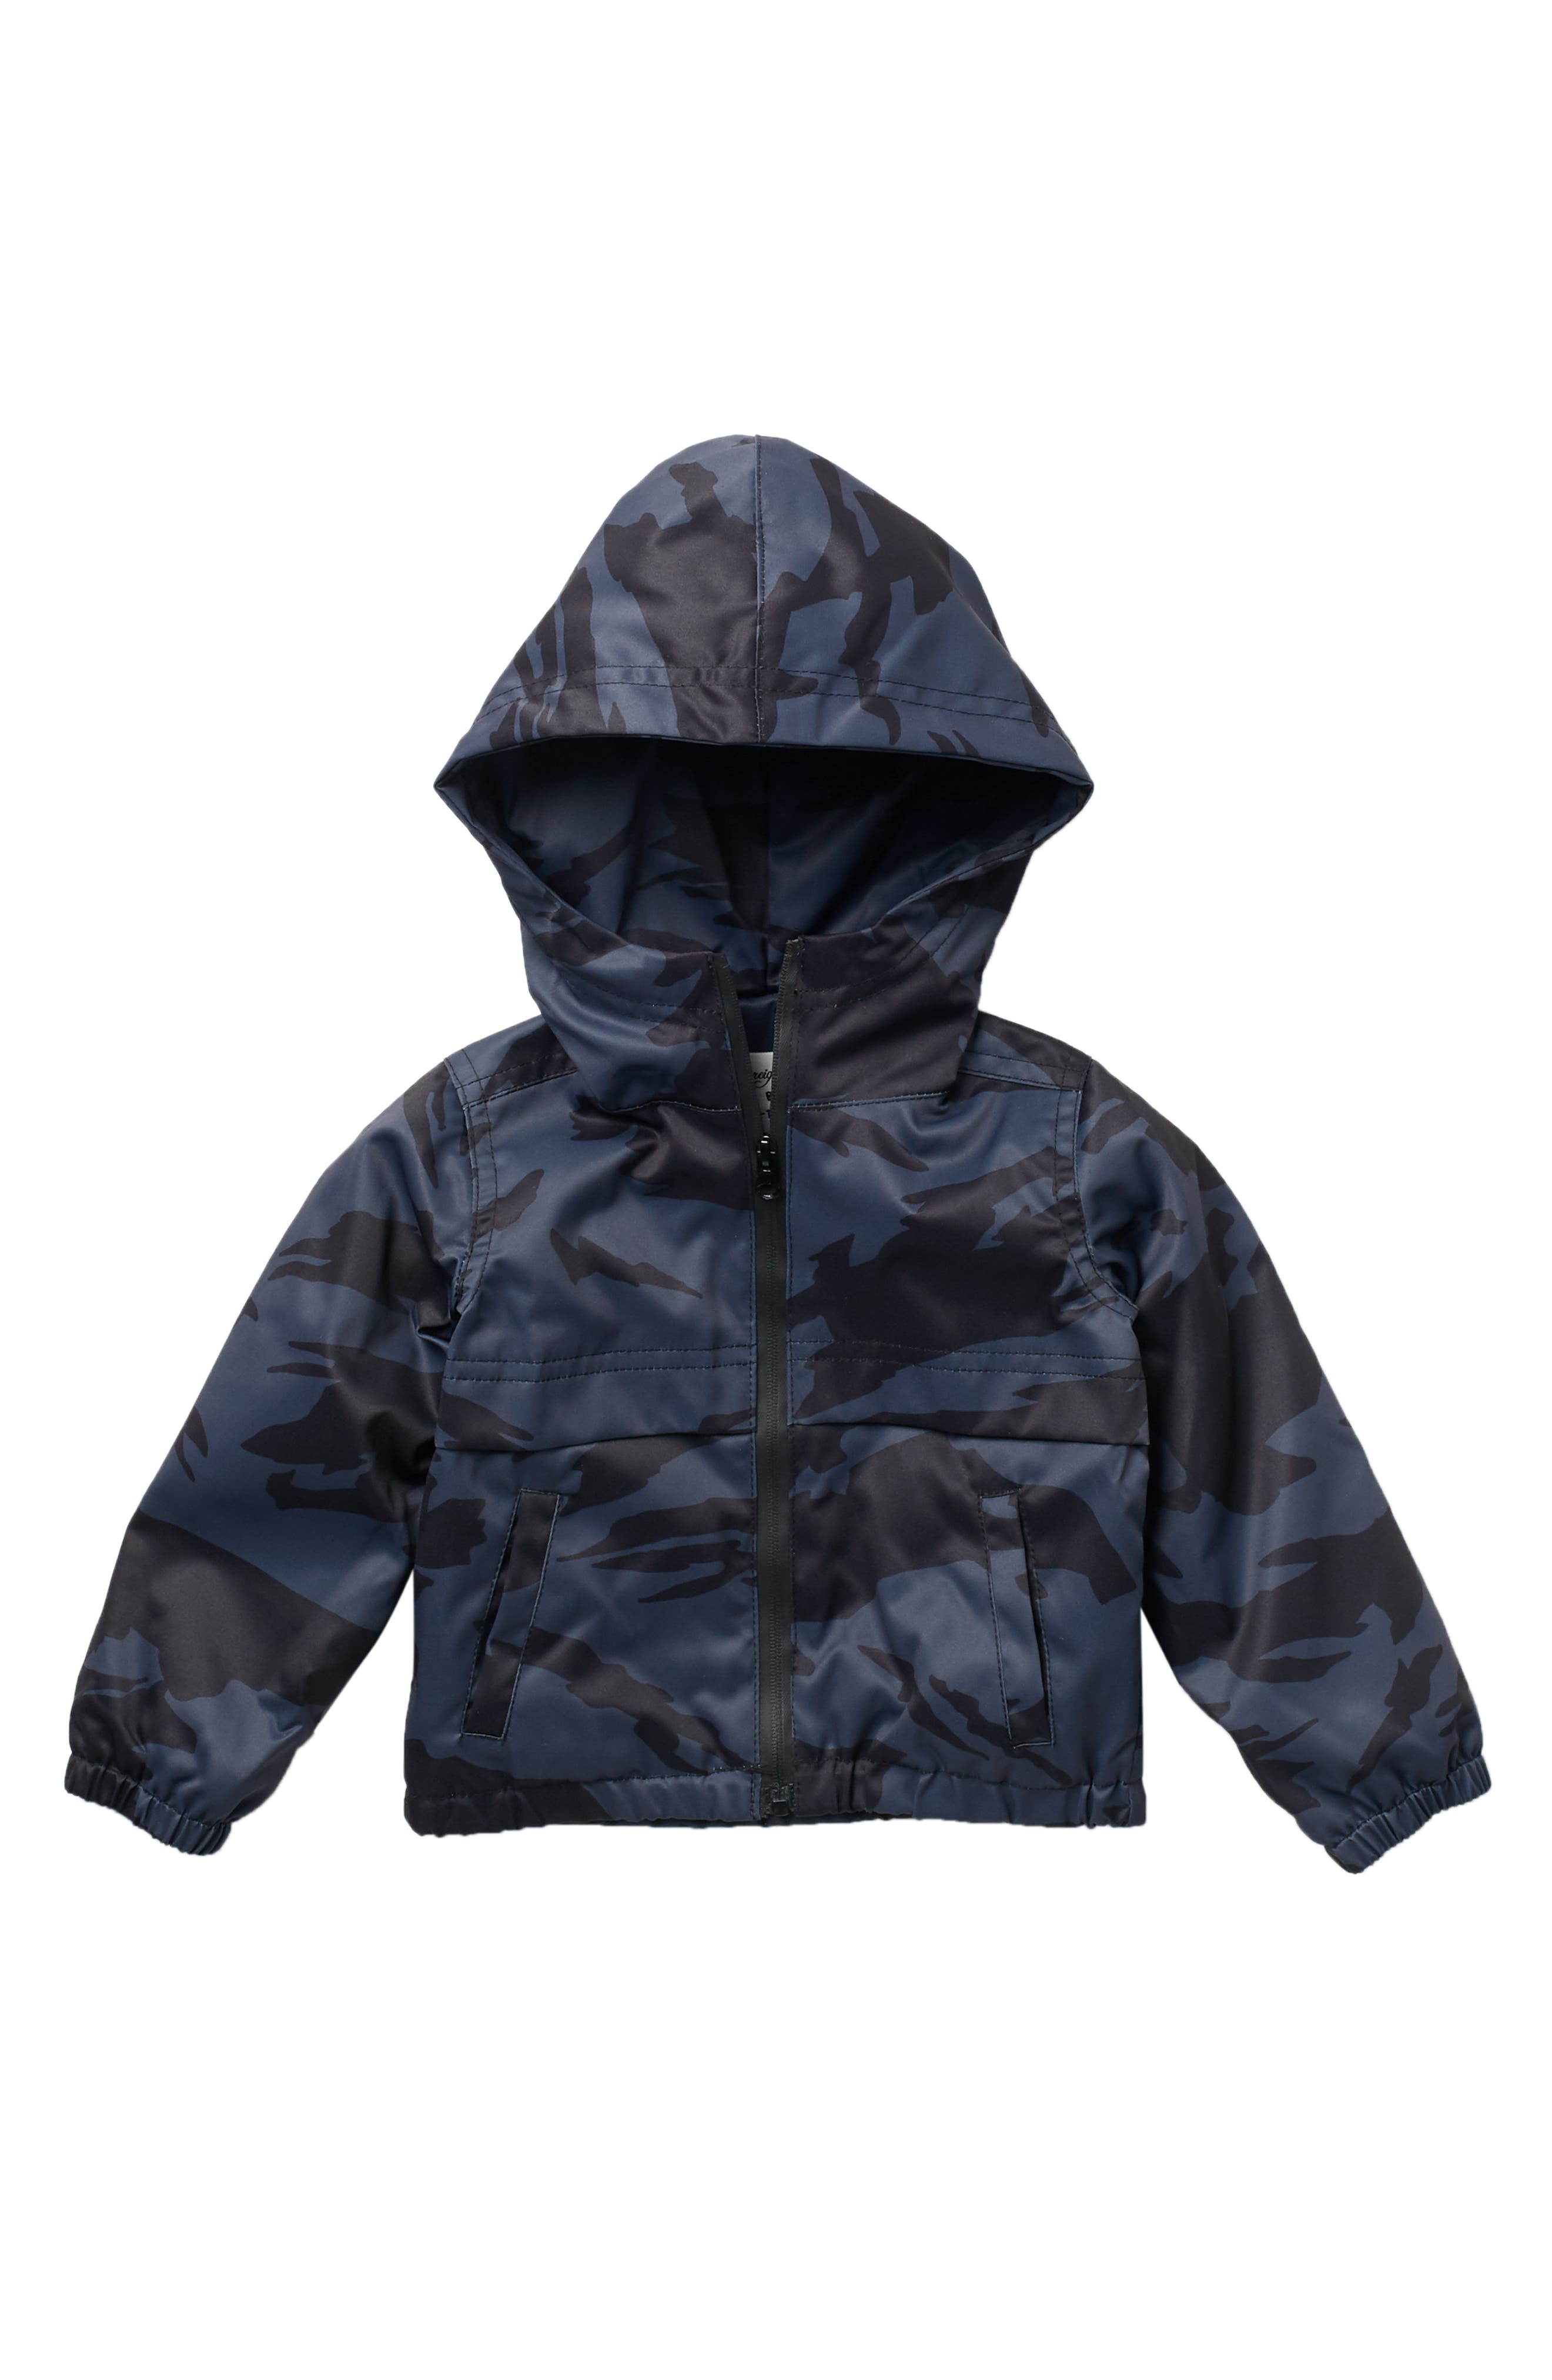 SOVEREIGN CODE REESE CAMO HOODED JACKET,190930351225